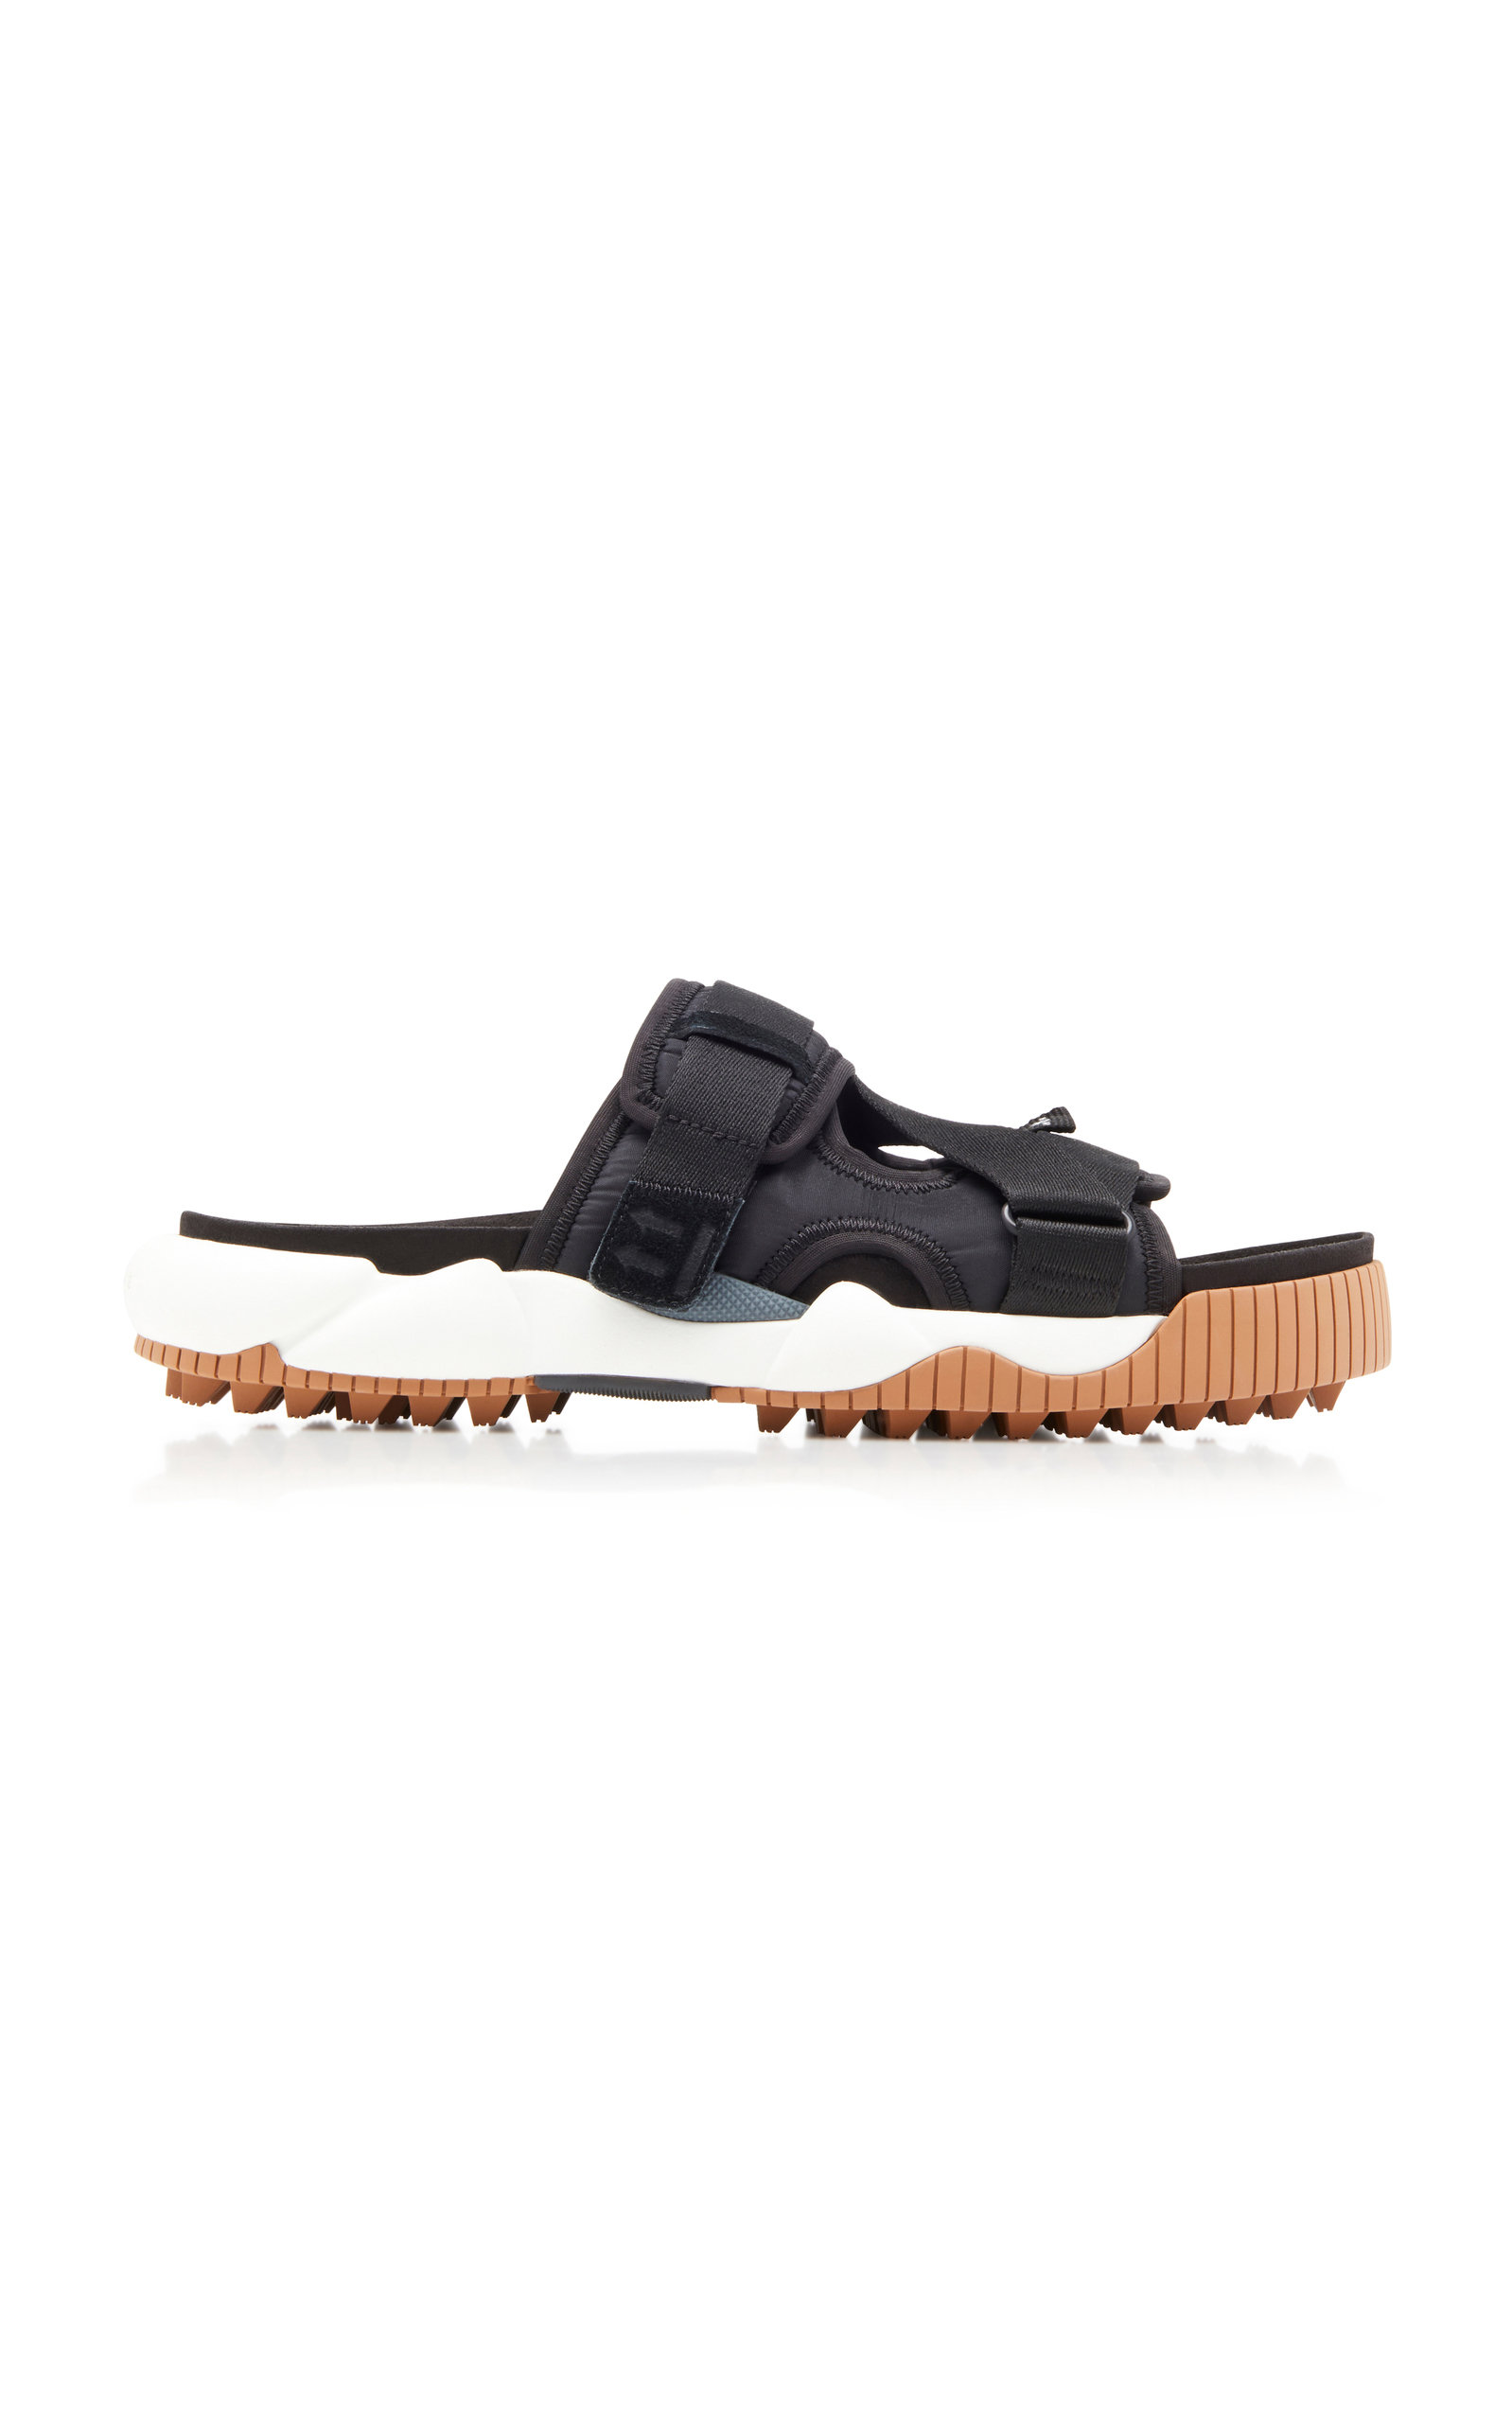 Off-White's 'Oddsy' sandals are the perfect addition to your luxury streetwear collection. Designed 